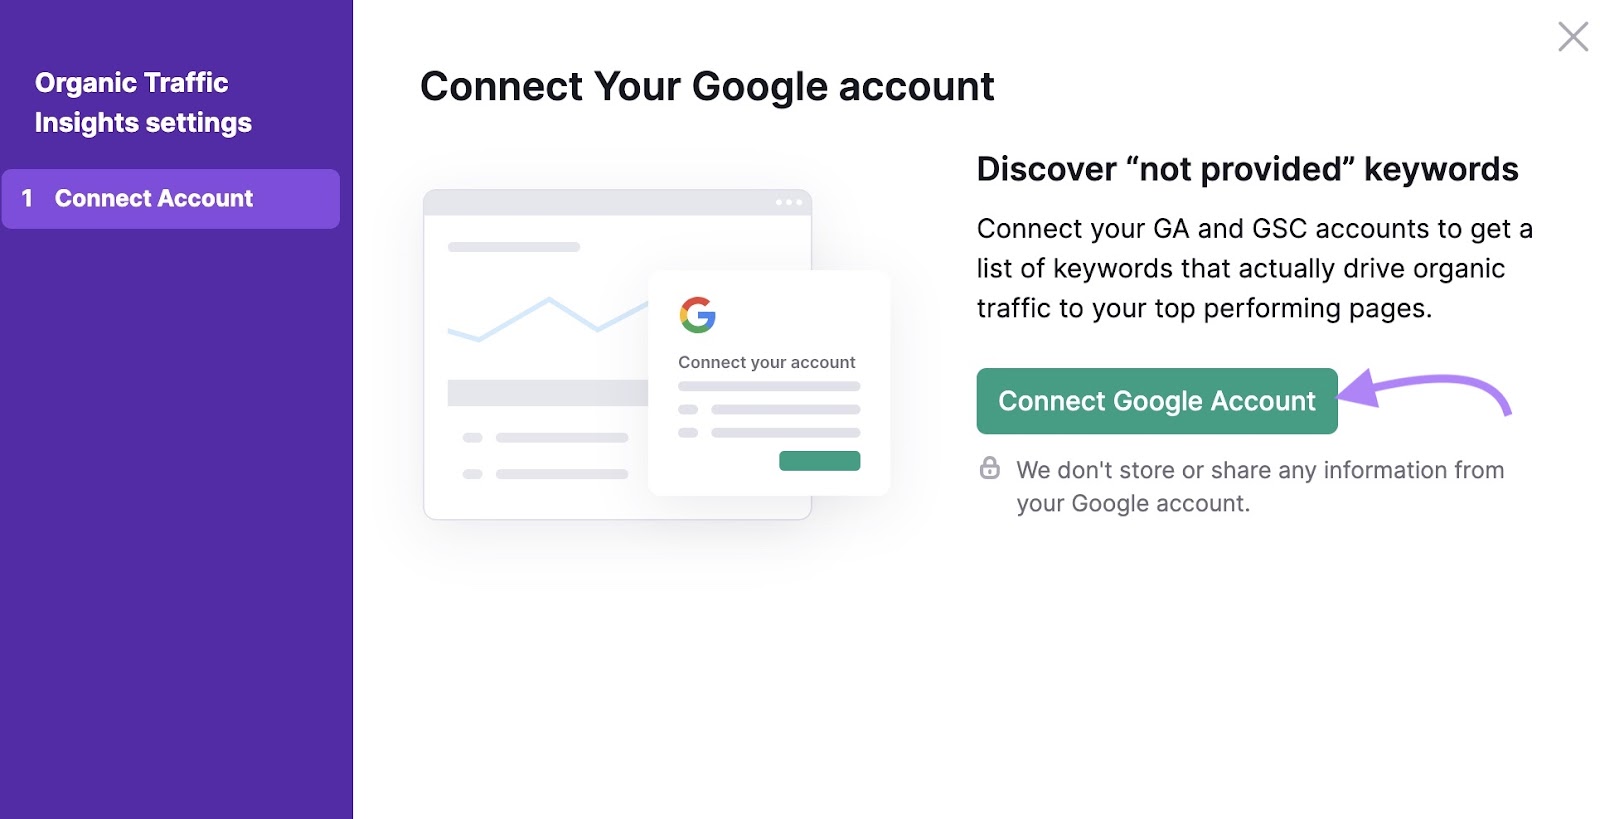 Organic traffic insights settings prompting you to connect your Google account to discover your top performing pages.